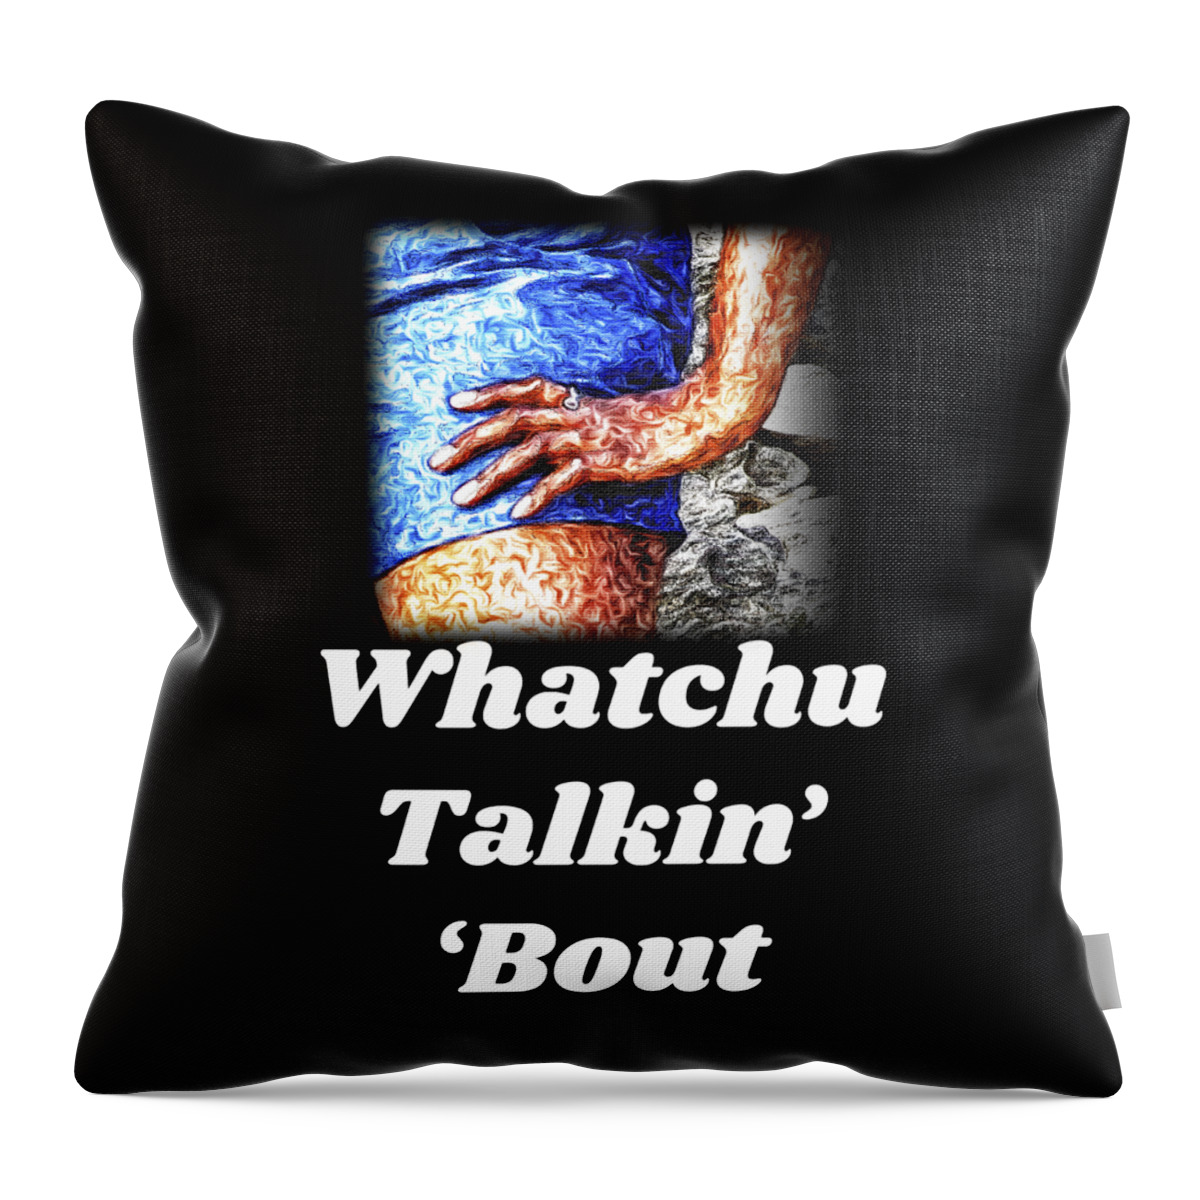 Hand; Hip; Sassy; Funny; Watercolor; Blue; Brown Throw Pillow featuring the digital art Whatchu Talkin' 'Bout by Tanya Owens